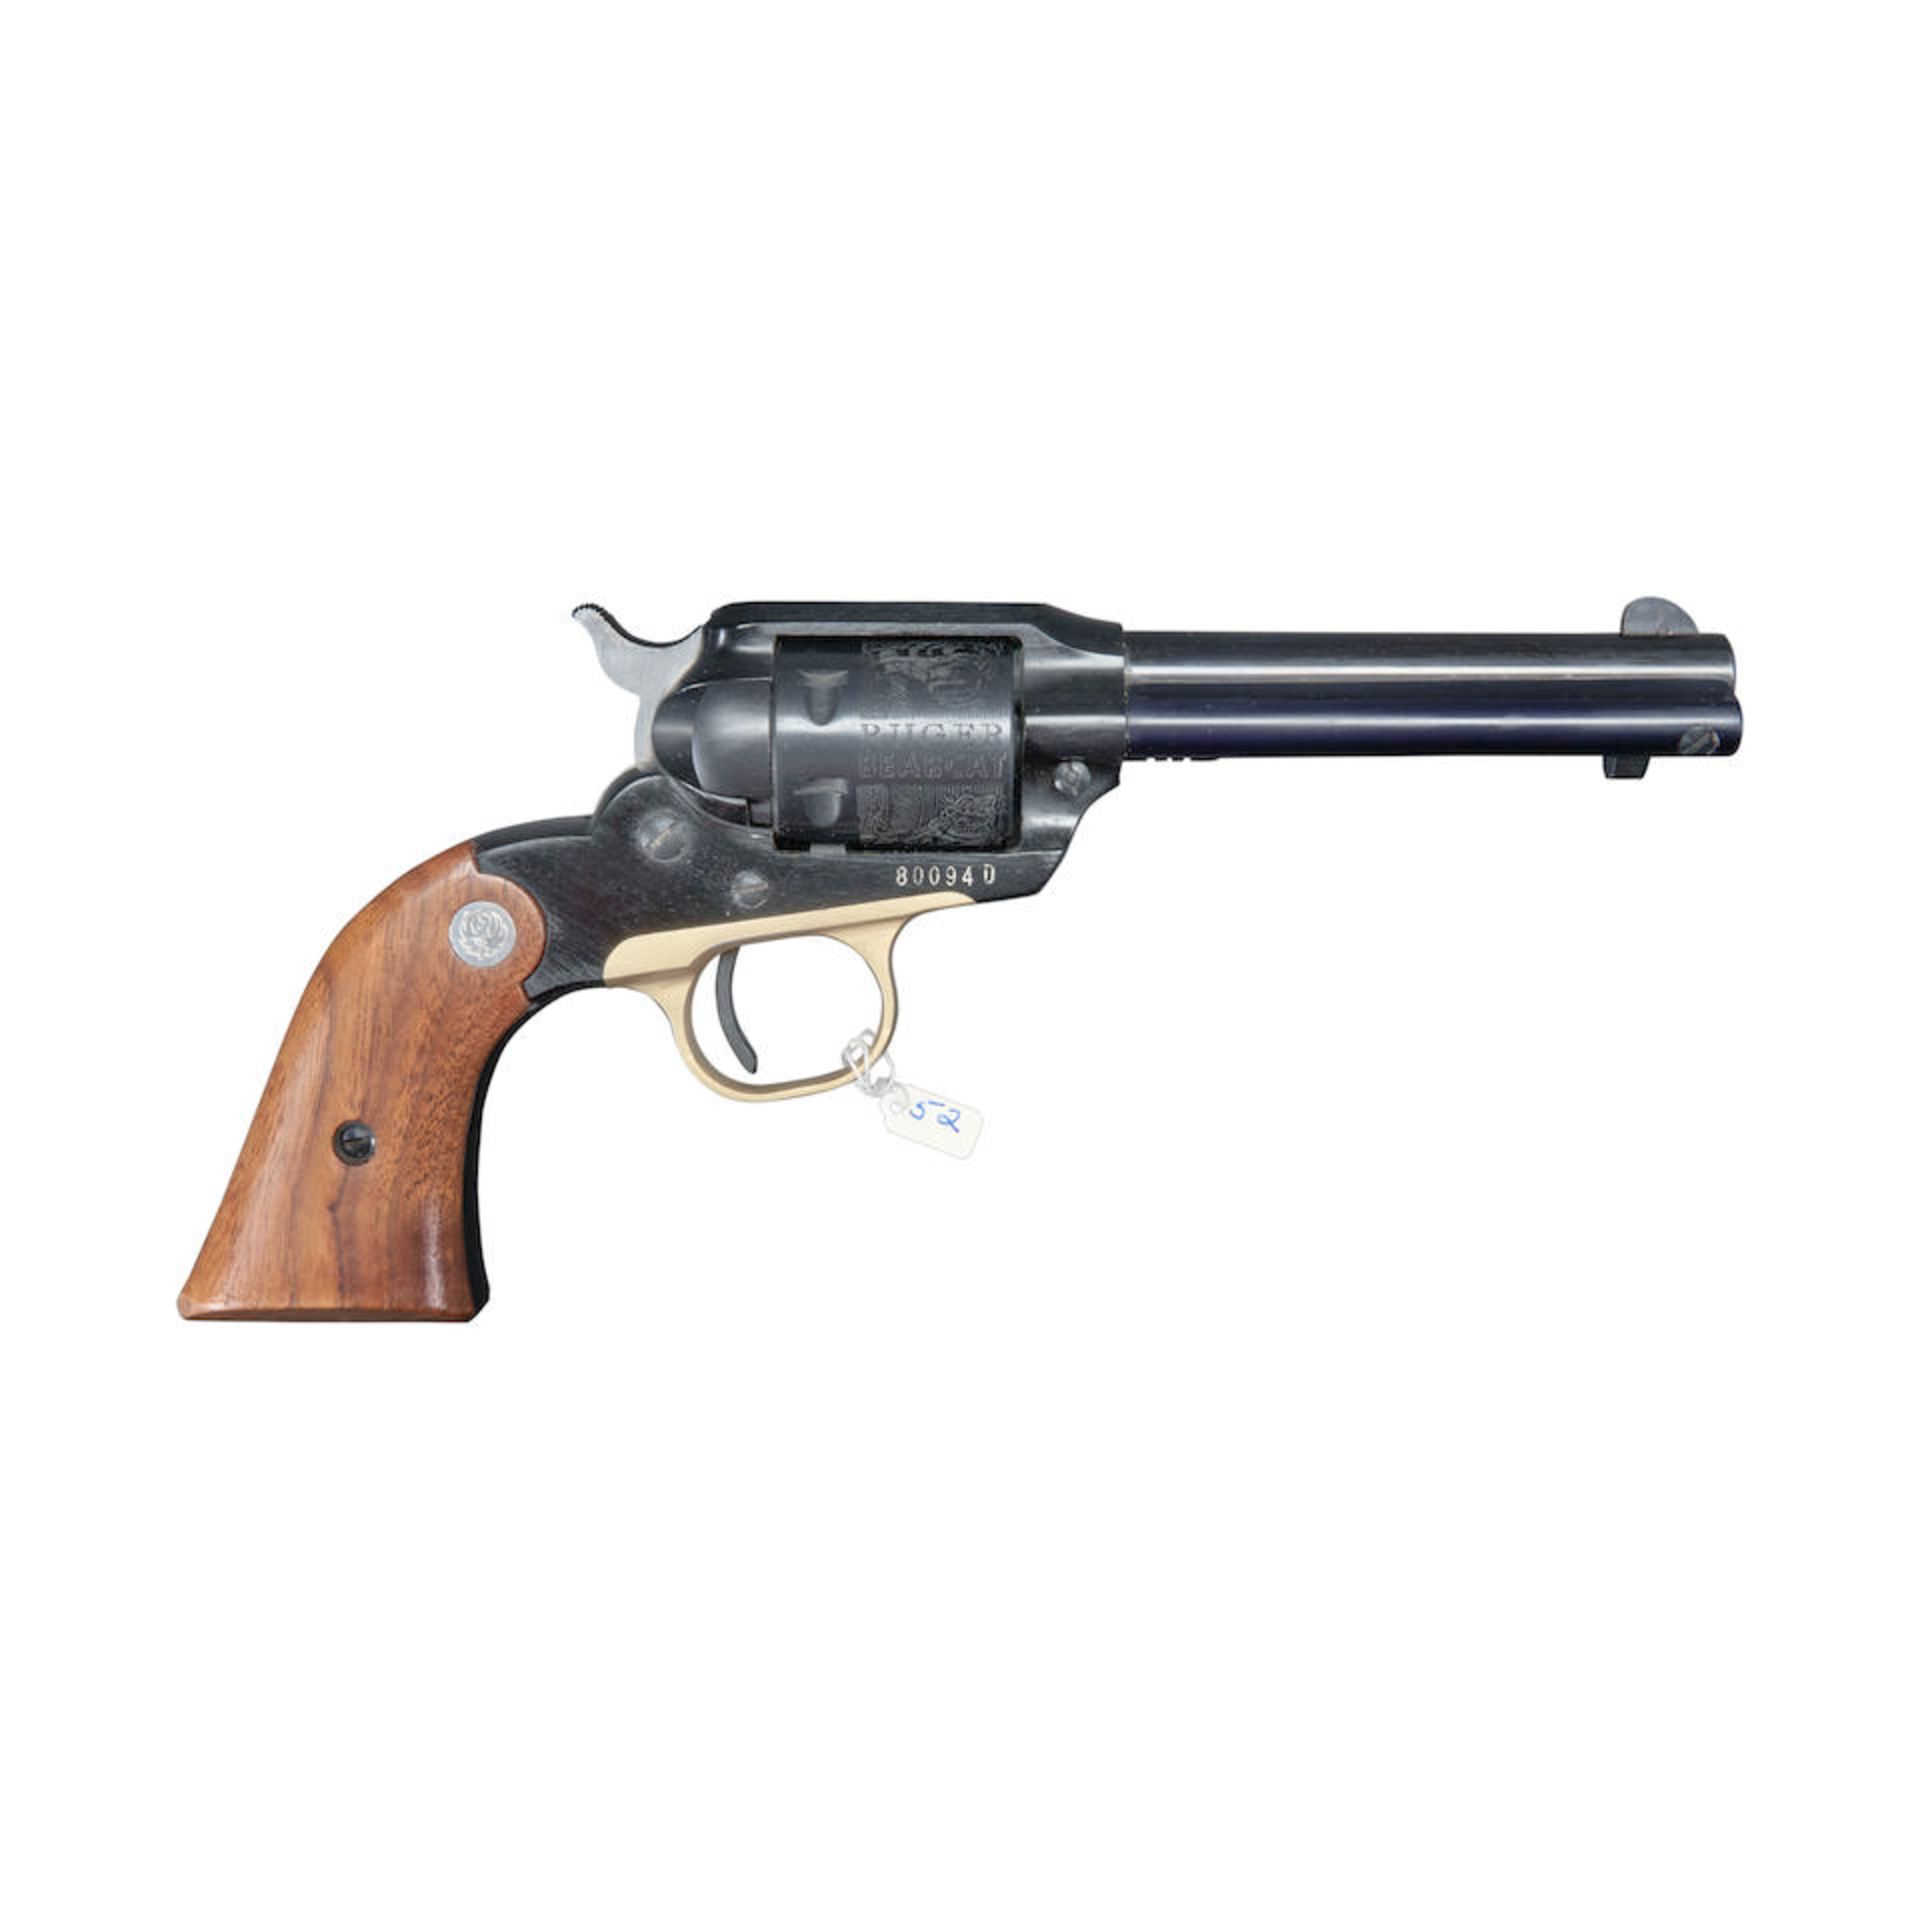 Ruger Bearcat Duplicate Serial Number Single Action Revolver, Curio or Relic firearm - Image 5 of 5